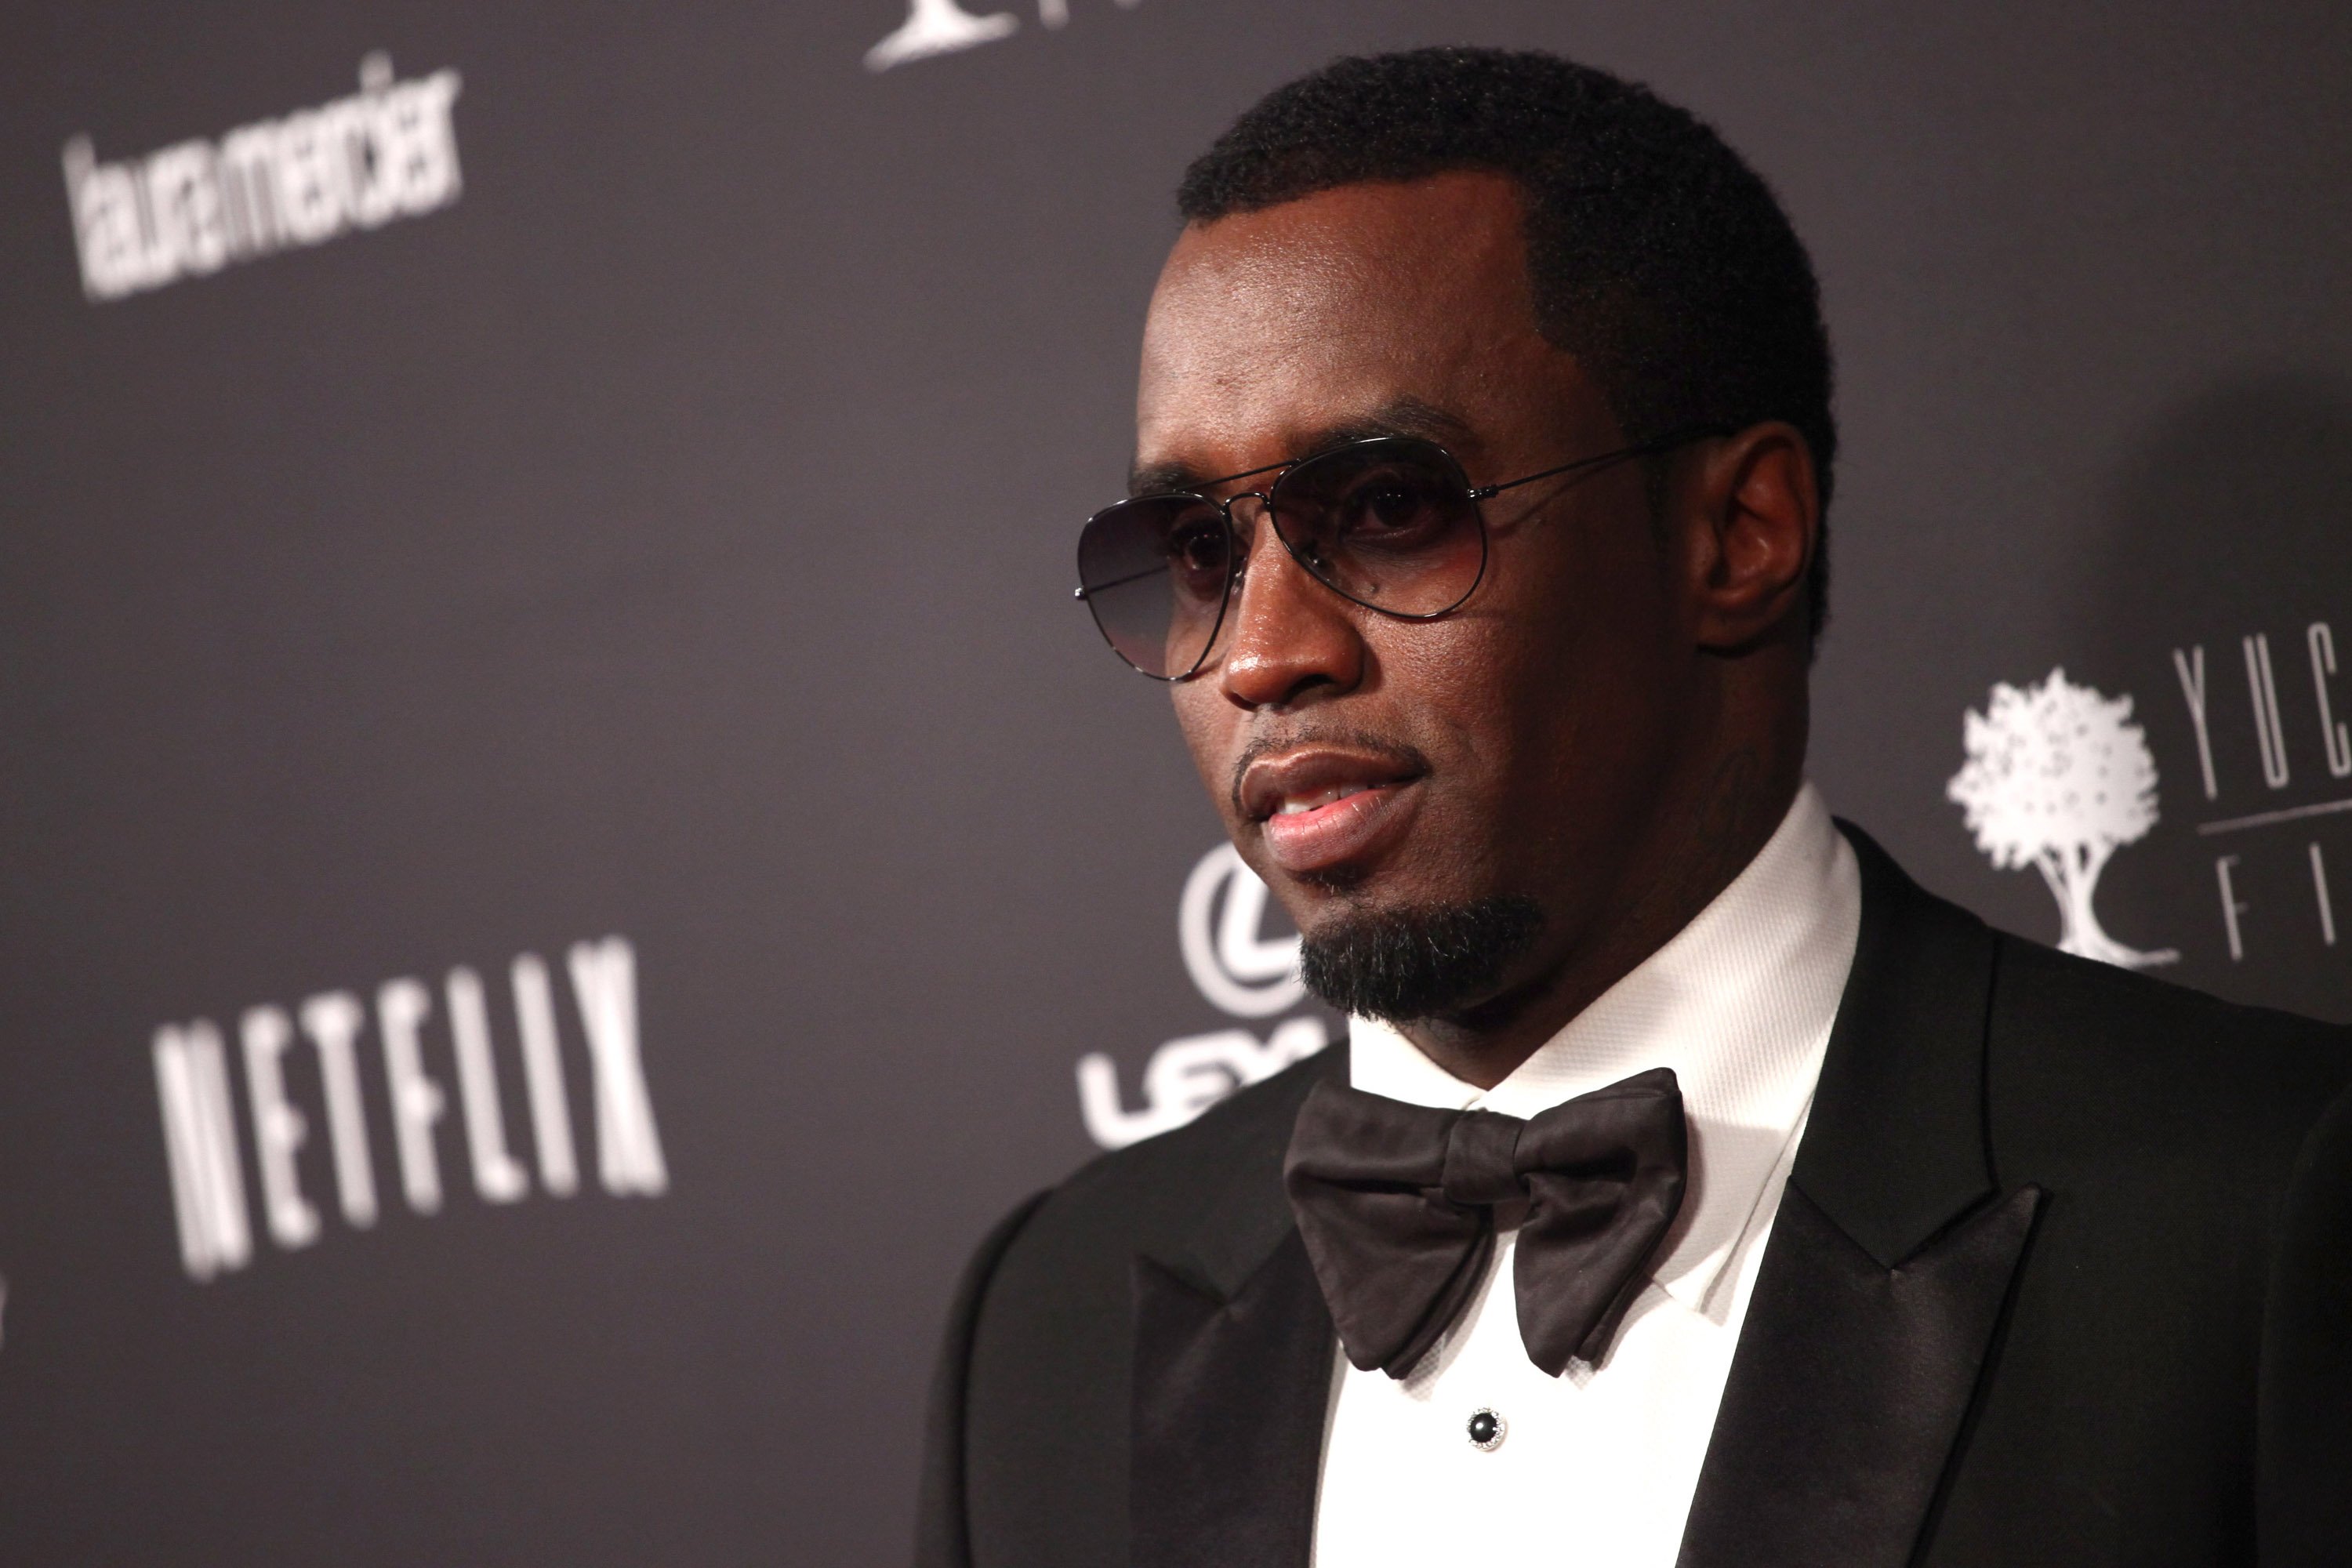 Sean Combs attends the Golden Globe Awards after-party on January 12, 2014, in Beverly Hills, California. | Source: Getty Images.